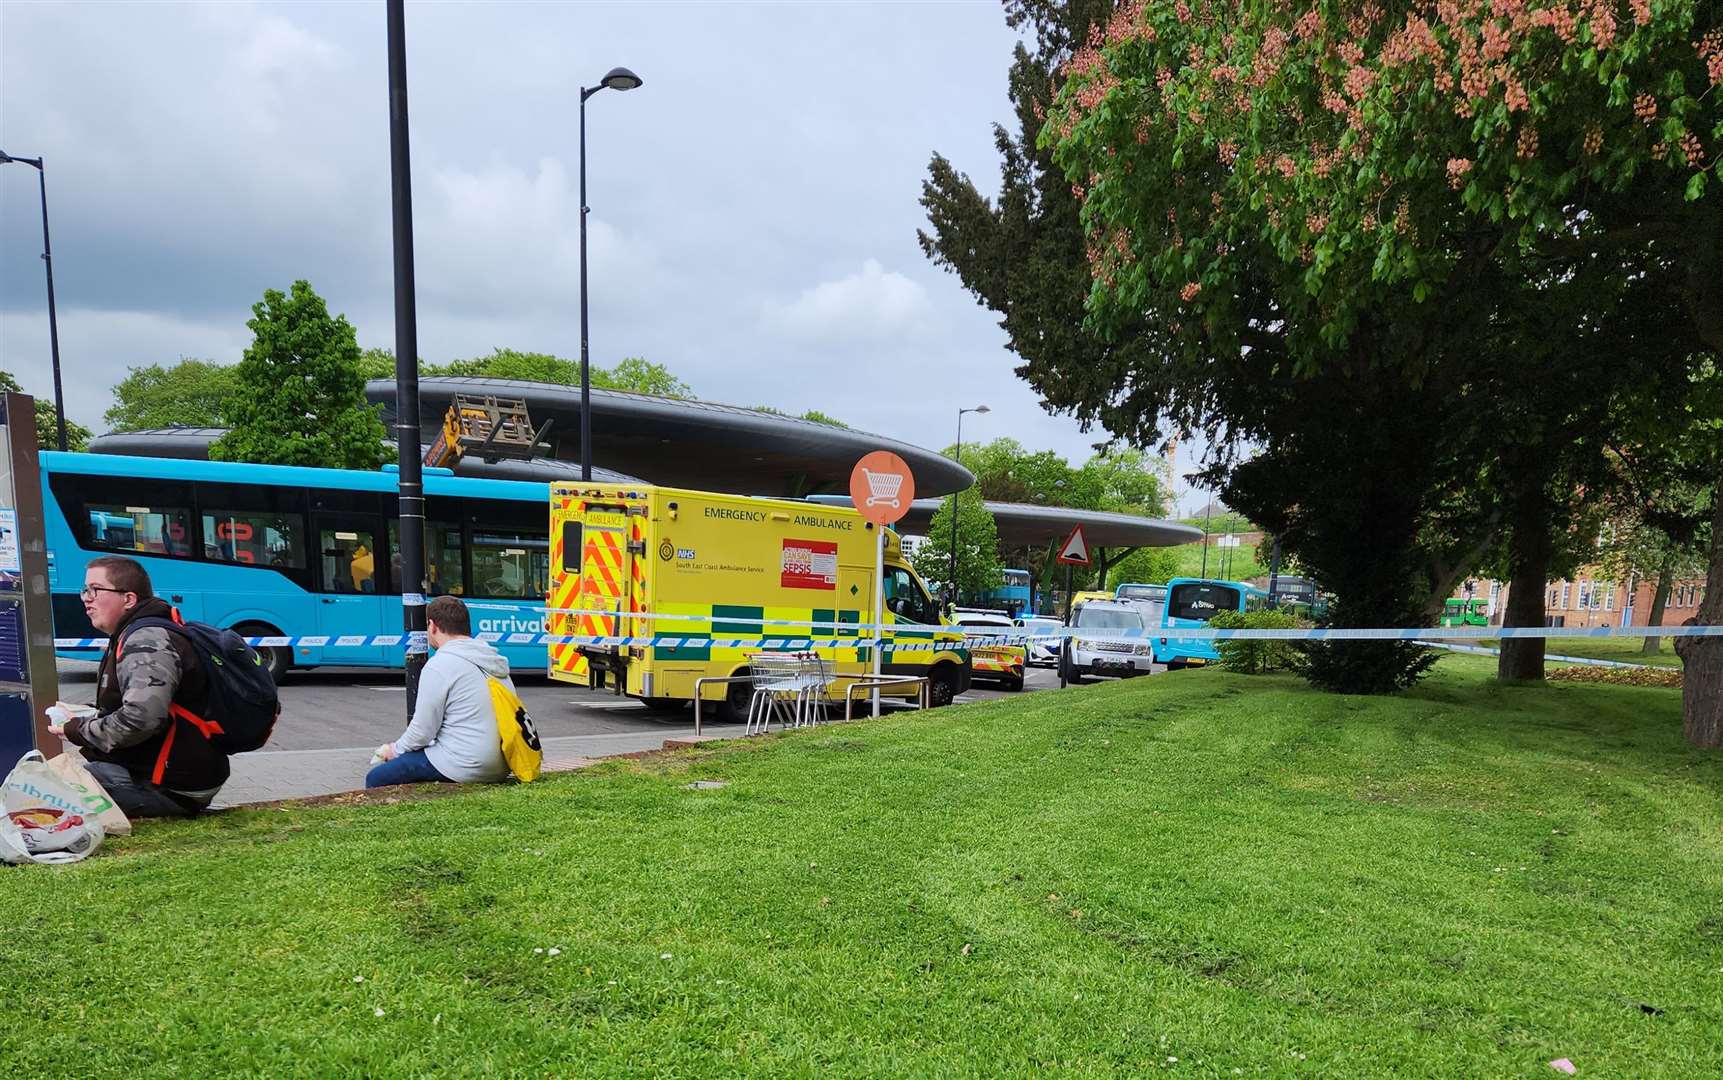 A fatal collision between a bus and a woman took place at Waterfront Bus Station, in Chatham